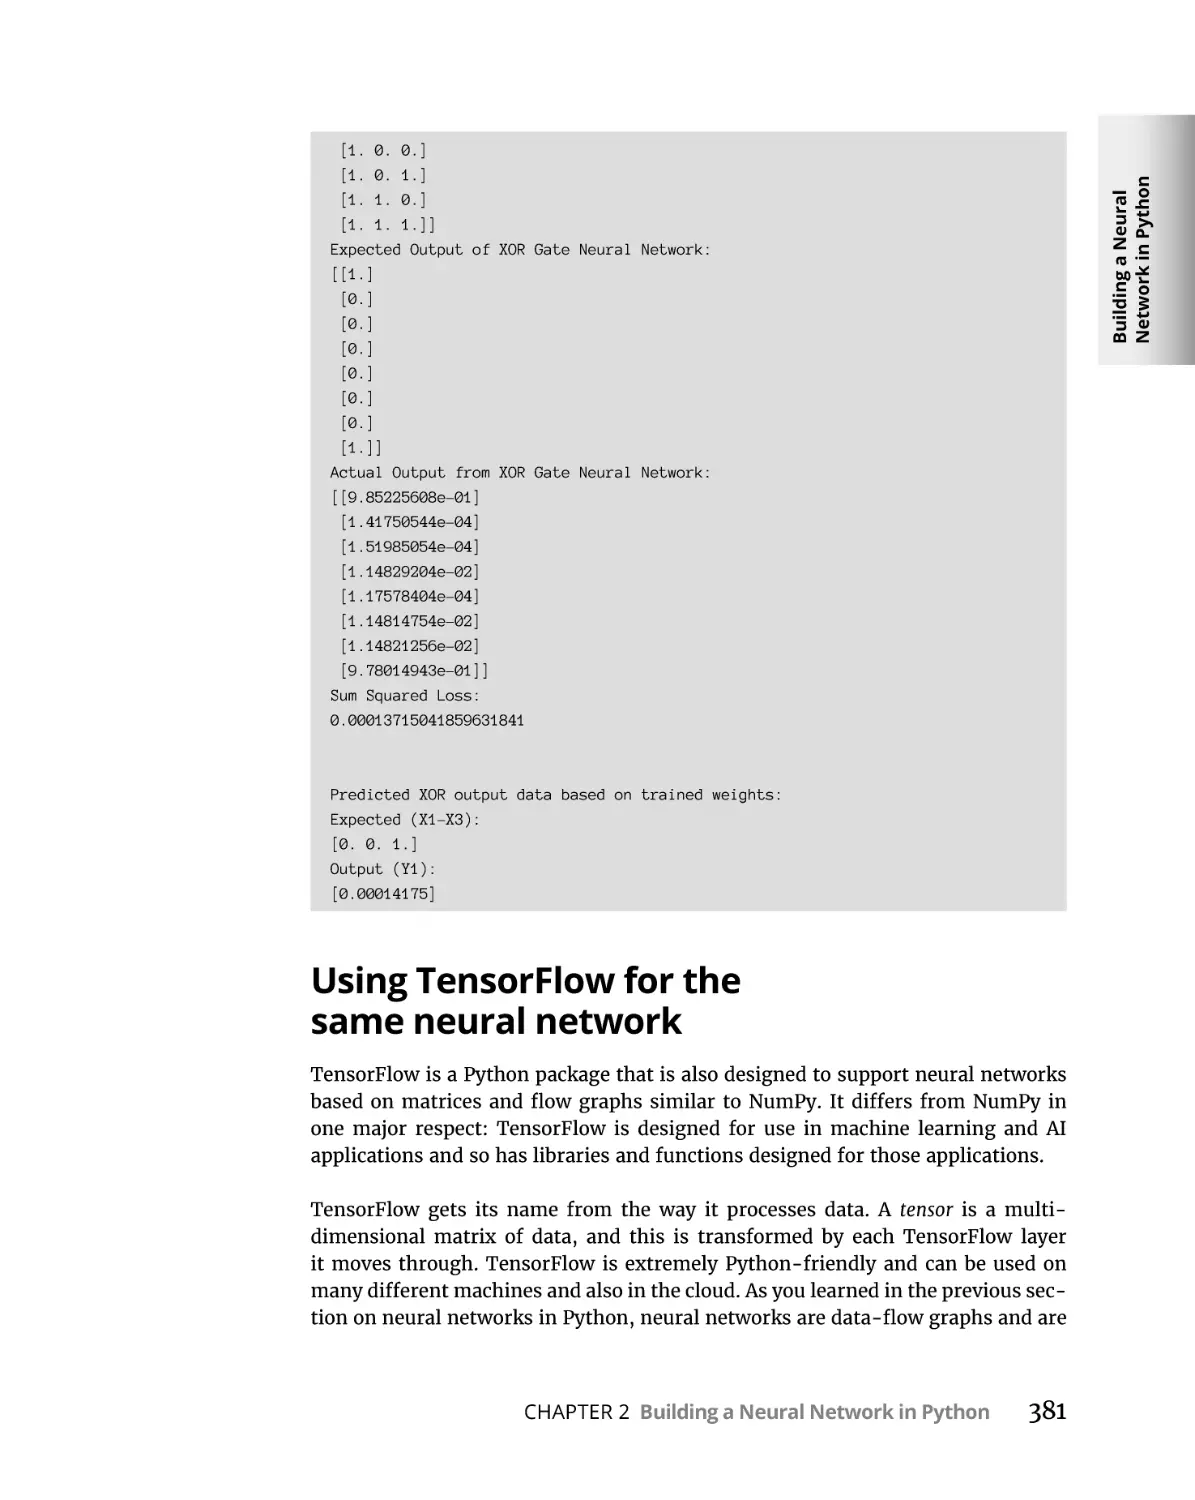 Using TensorFlow for the same neural network